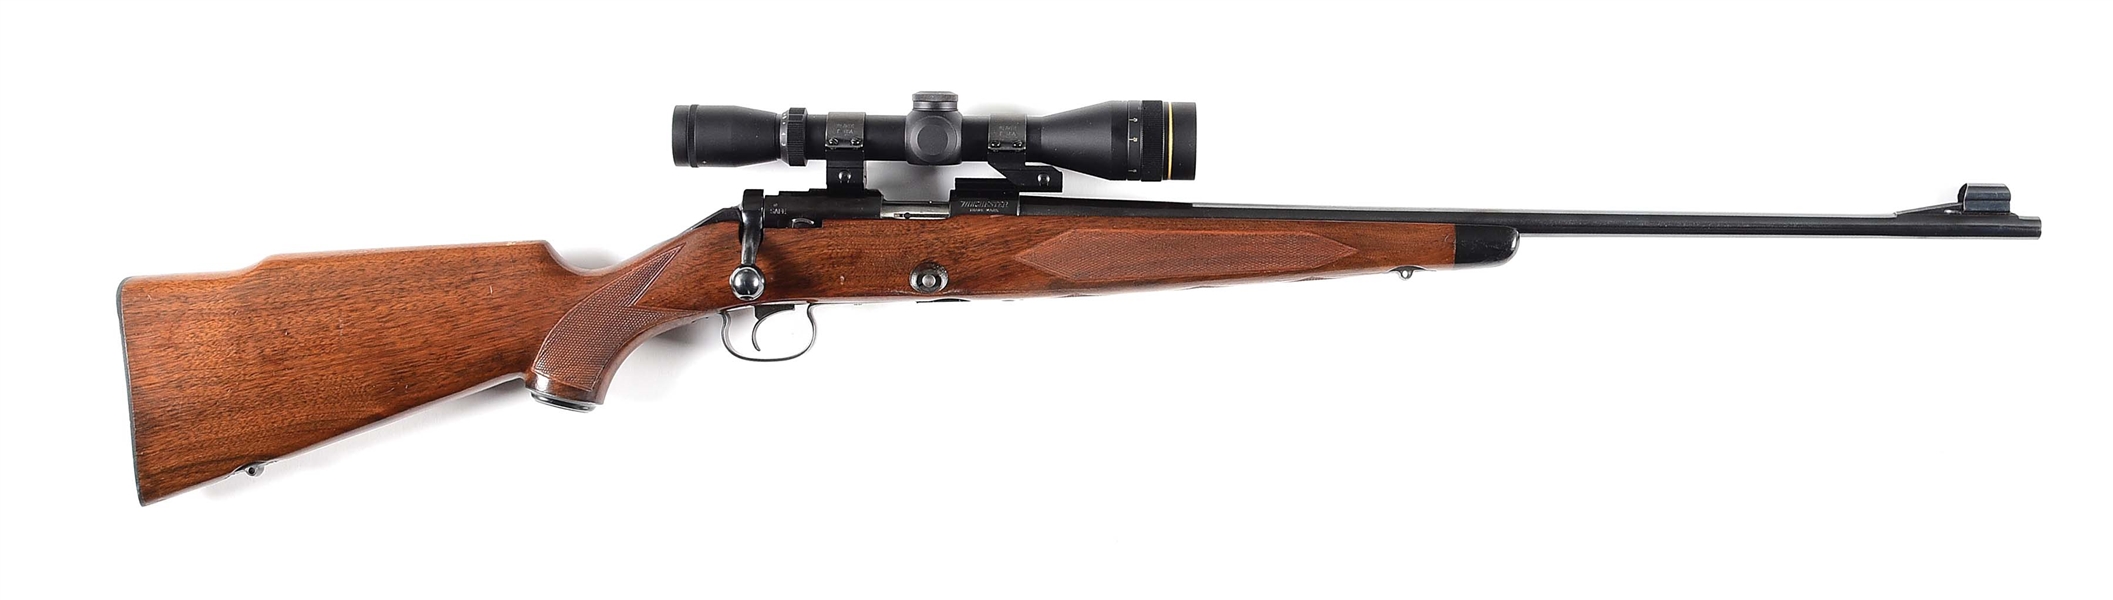 (C) WINCHESTER 52C BOLT ACTION .22 LR RIFLE WITH SCOPE.